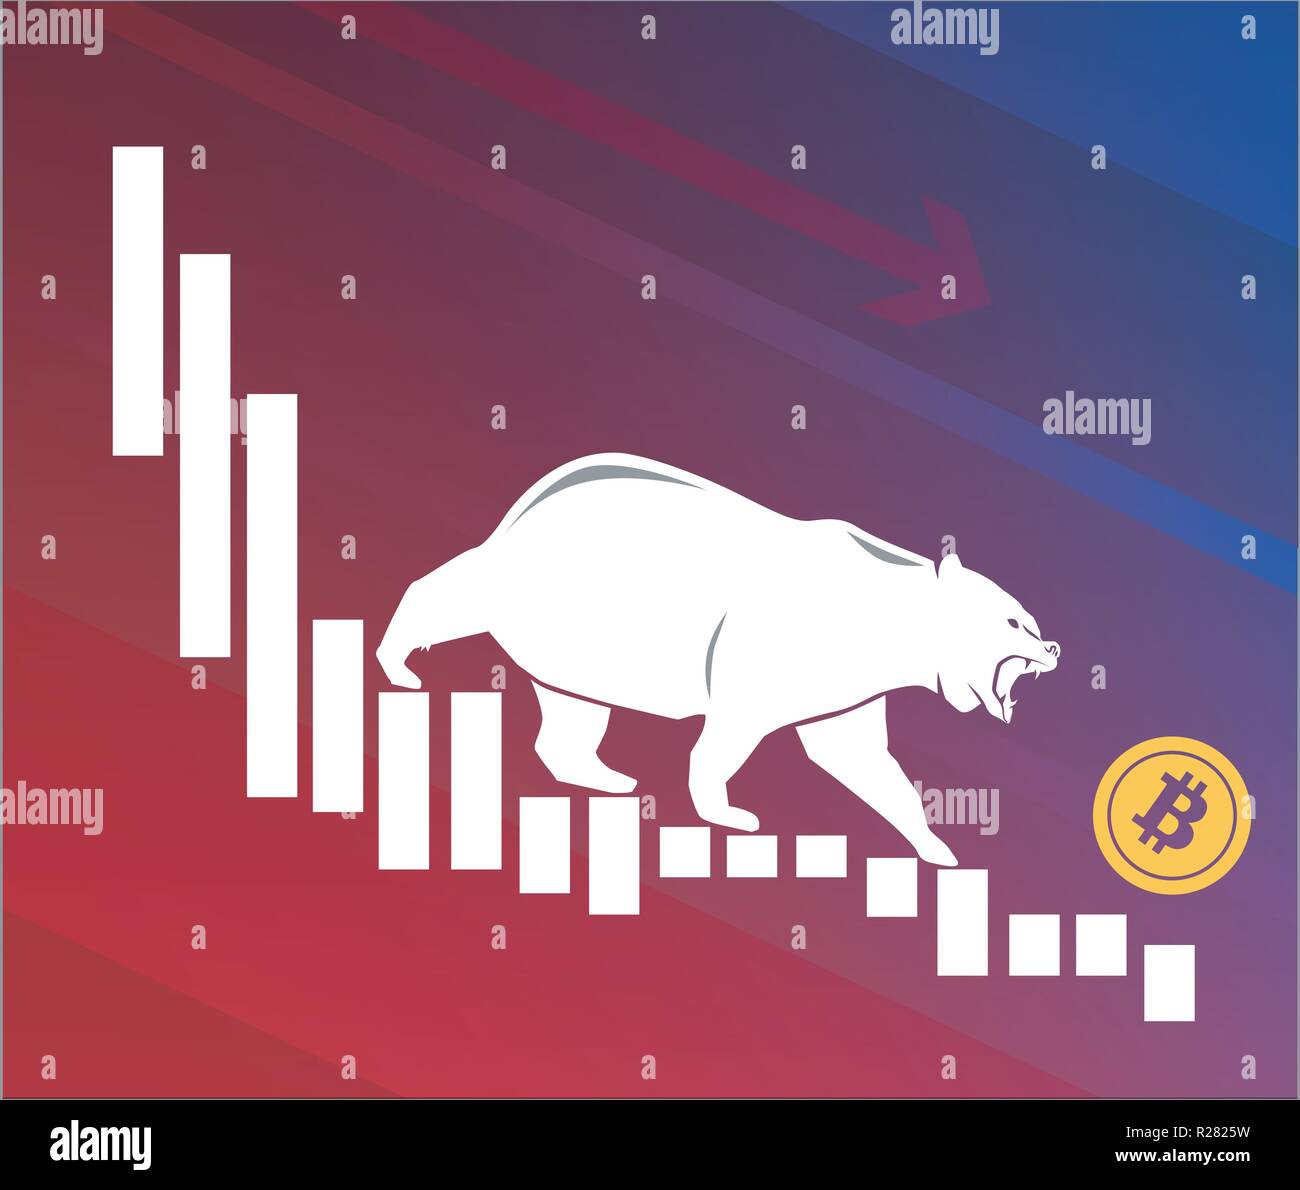 Bear moves Bitcoin down on graph, negative cryptocurrency market, red background Stock Vector